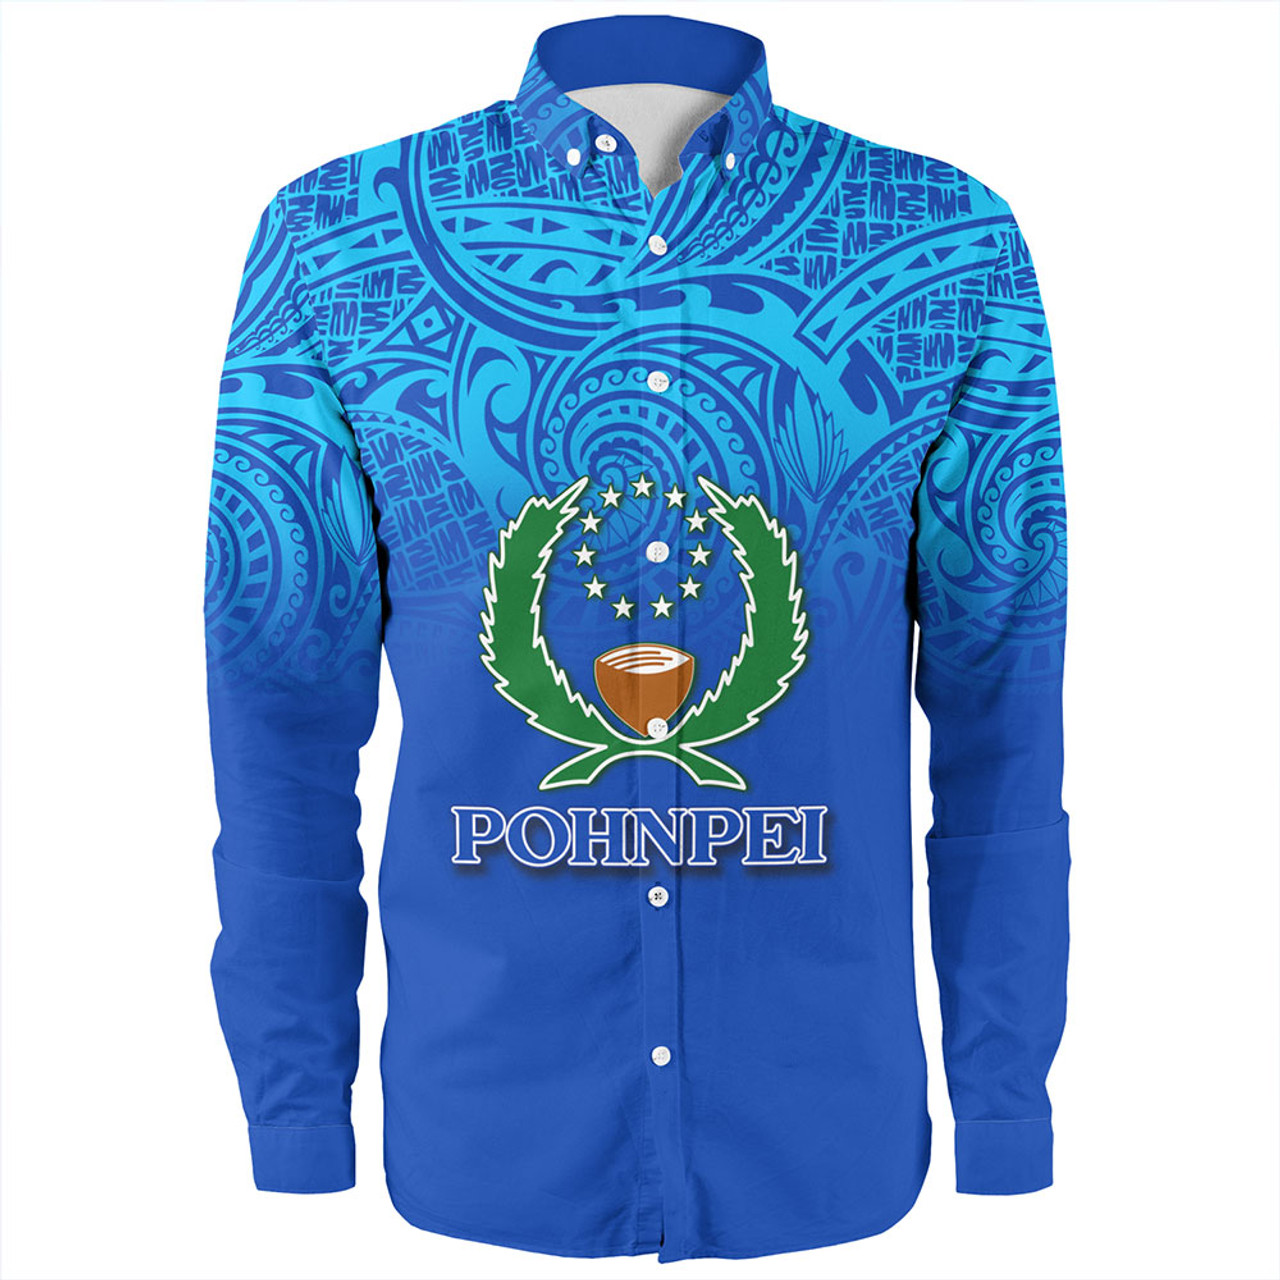 Pohnpei State Long Sleeve Shirt Flag Color With Traditional Patterns